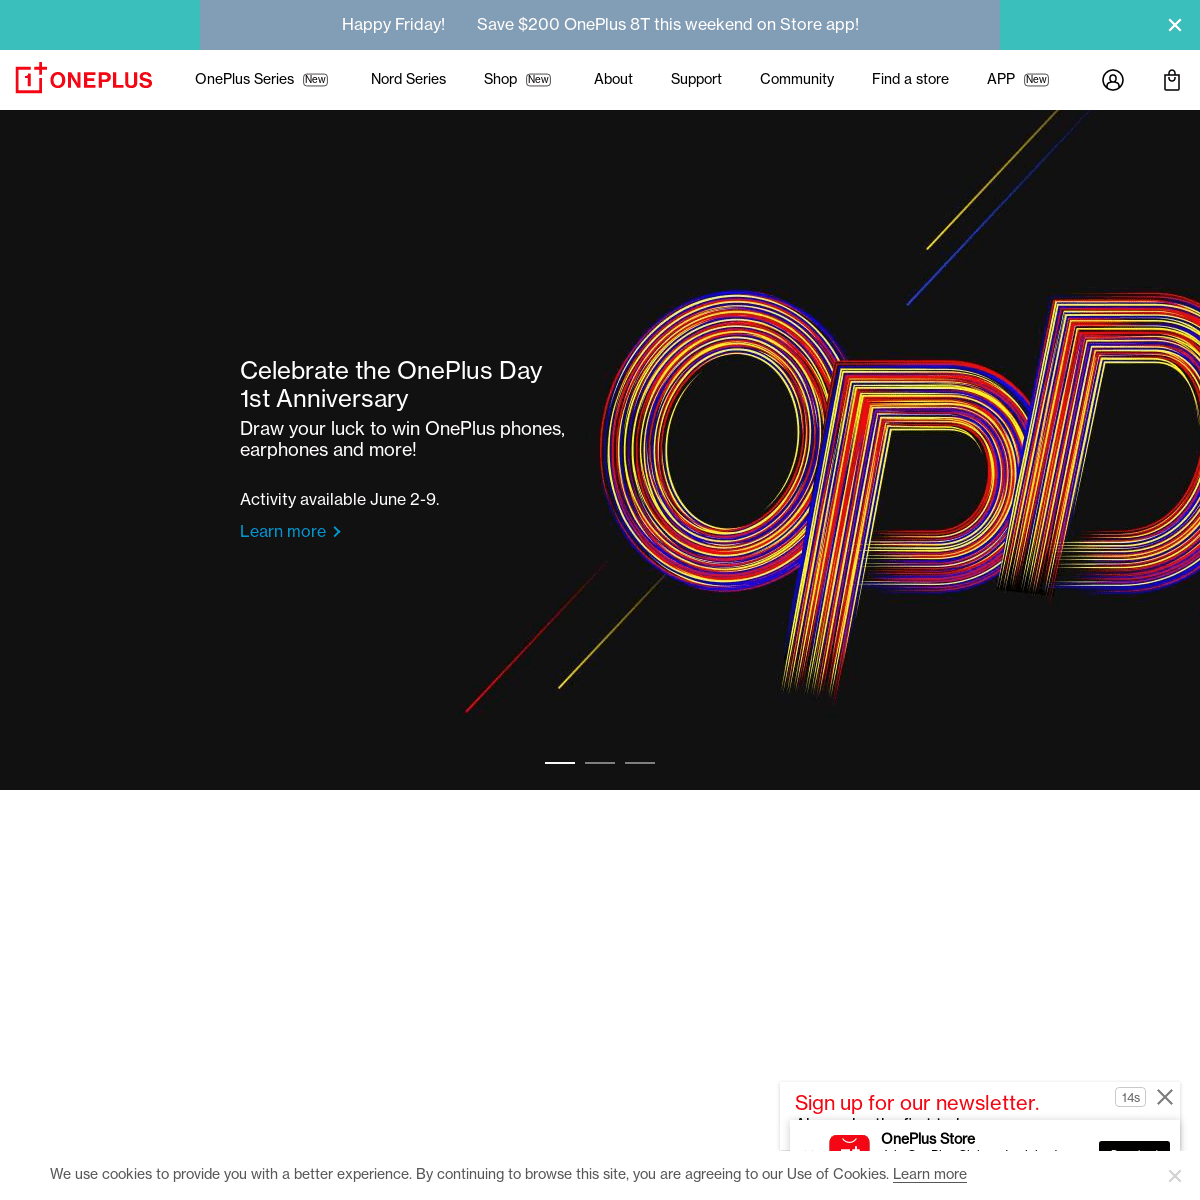 A complete backup of https://oneplus.com